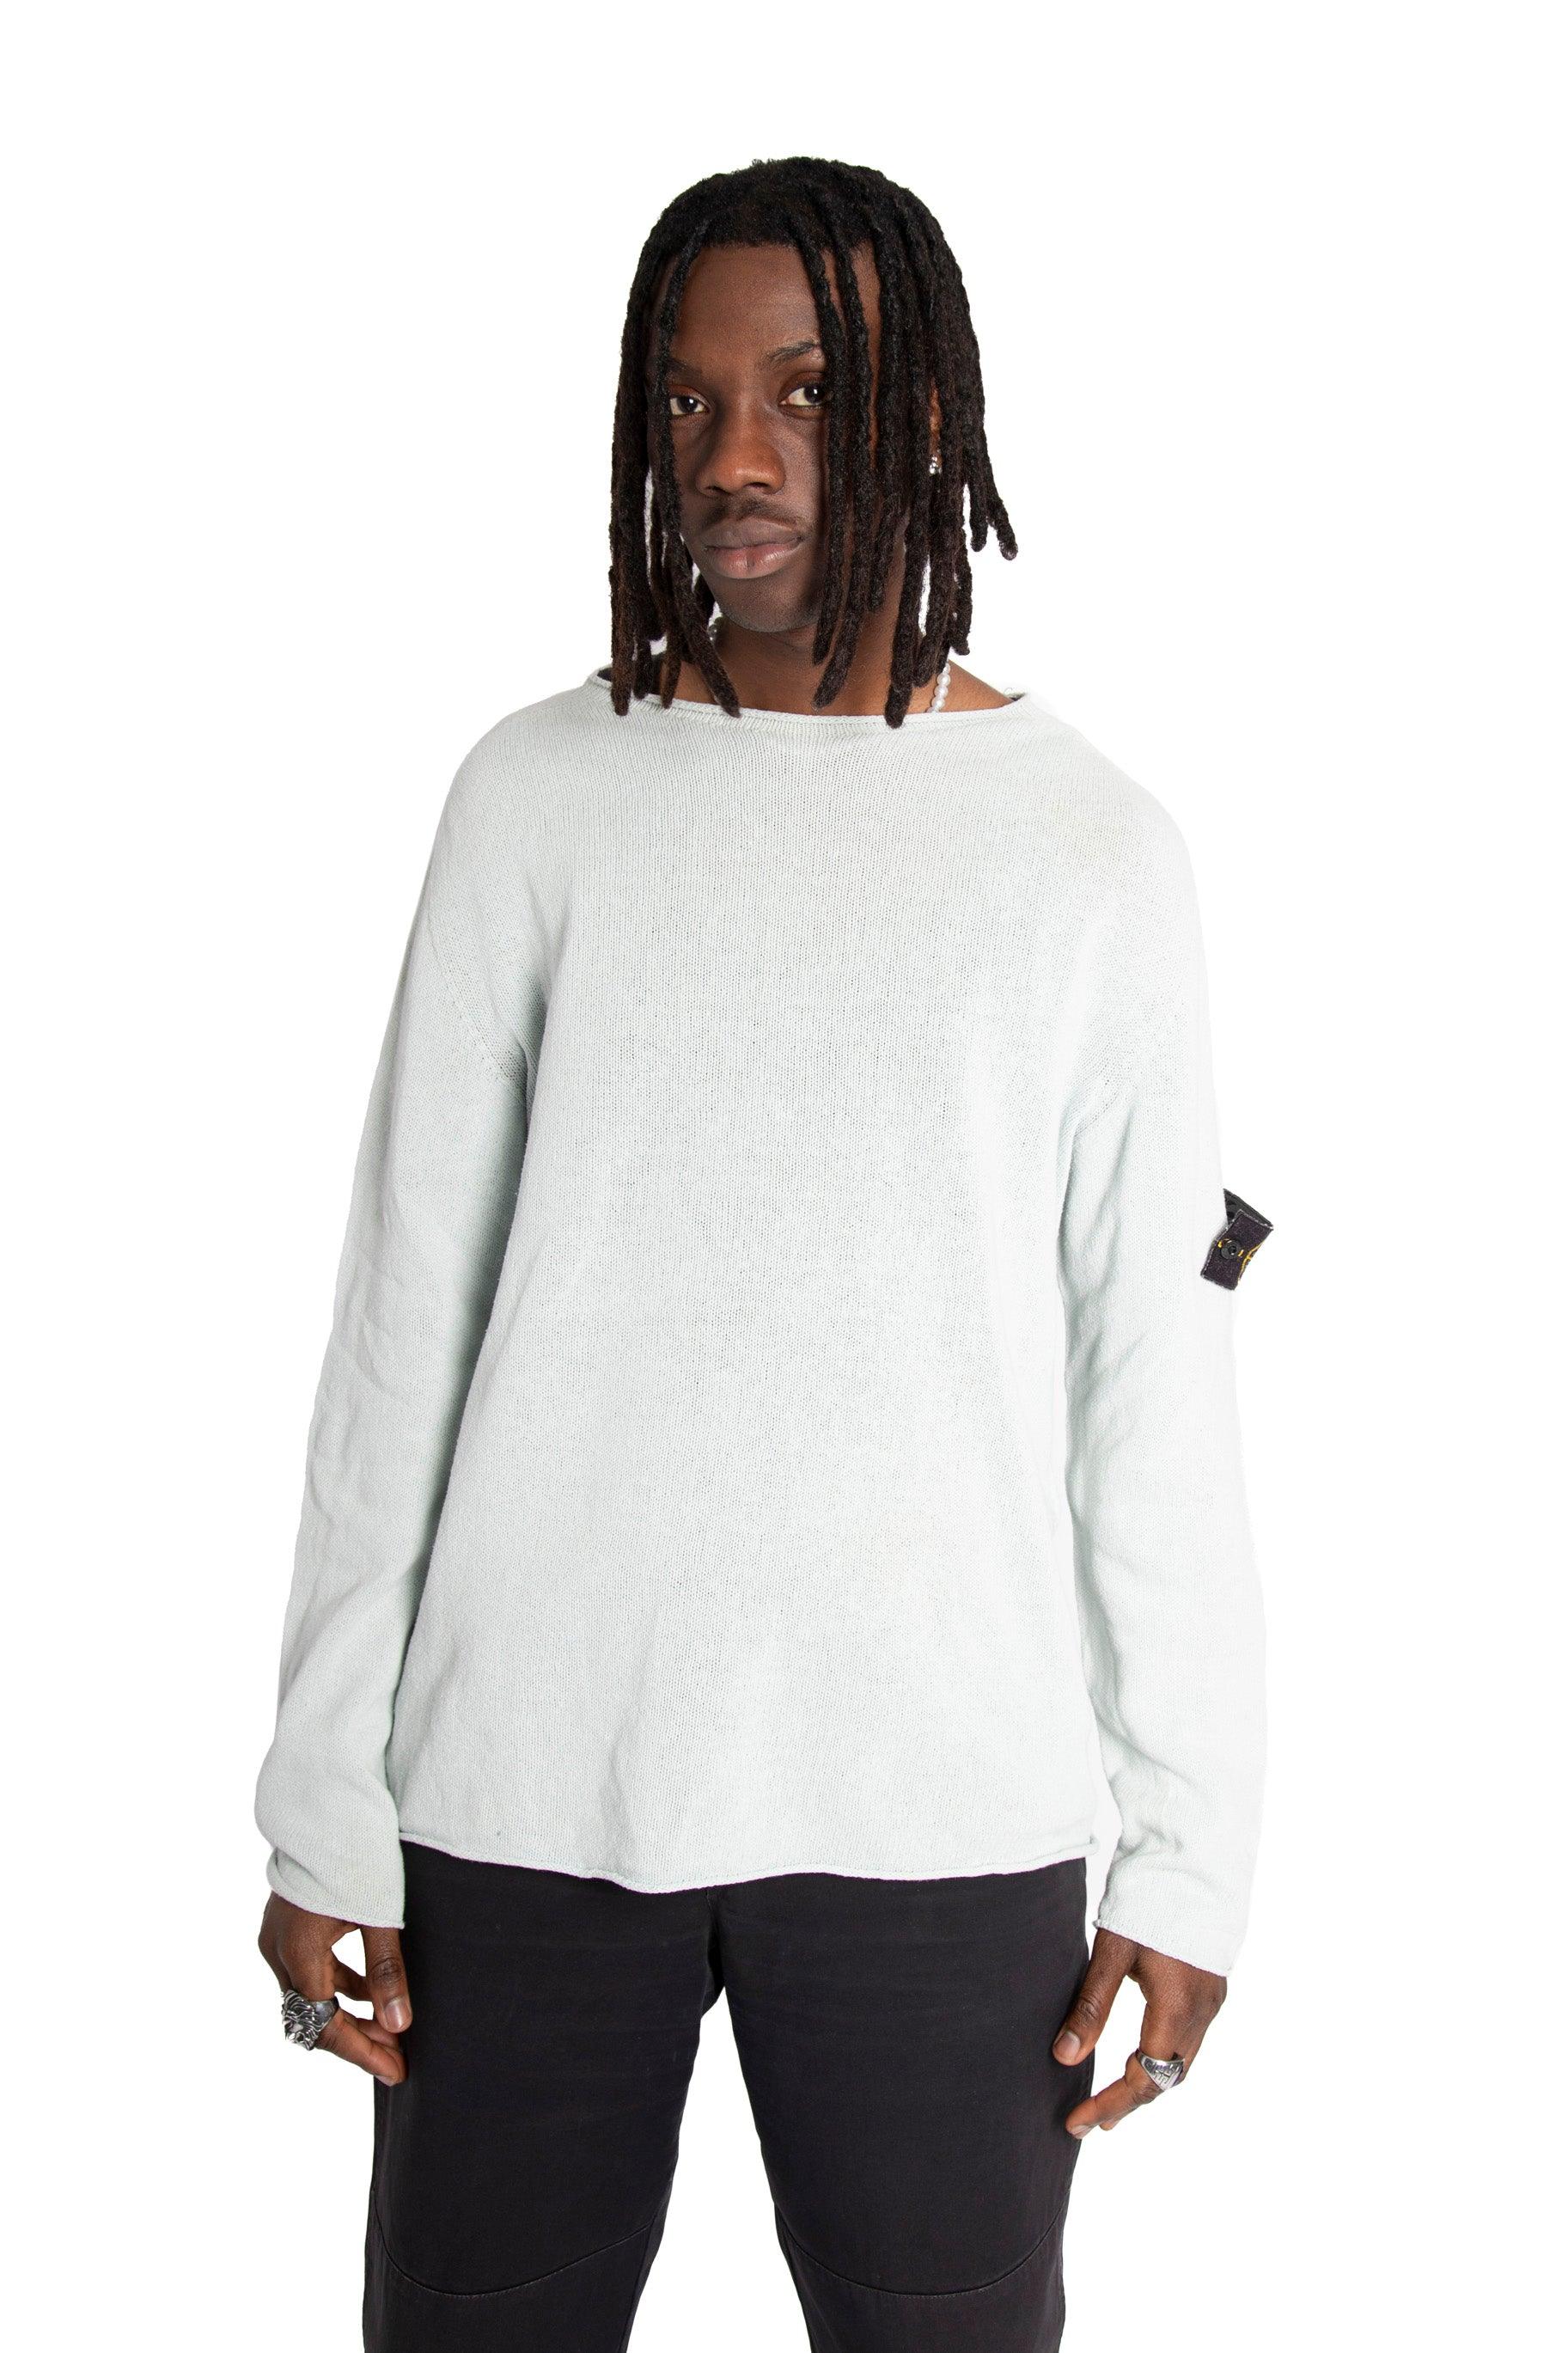 Stone Island S/S 2008 Mint Knit Sweater - Known Source